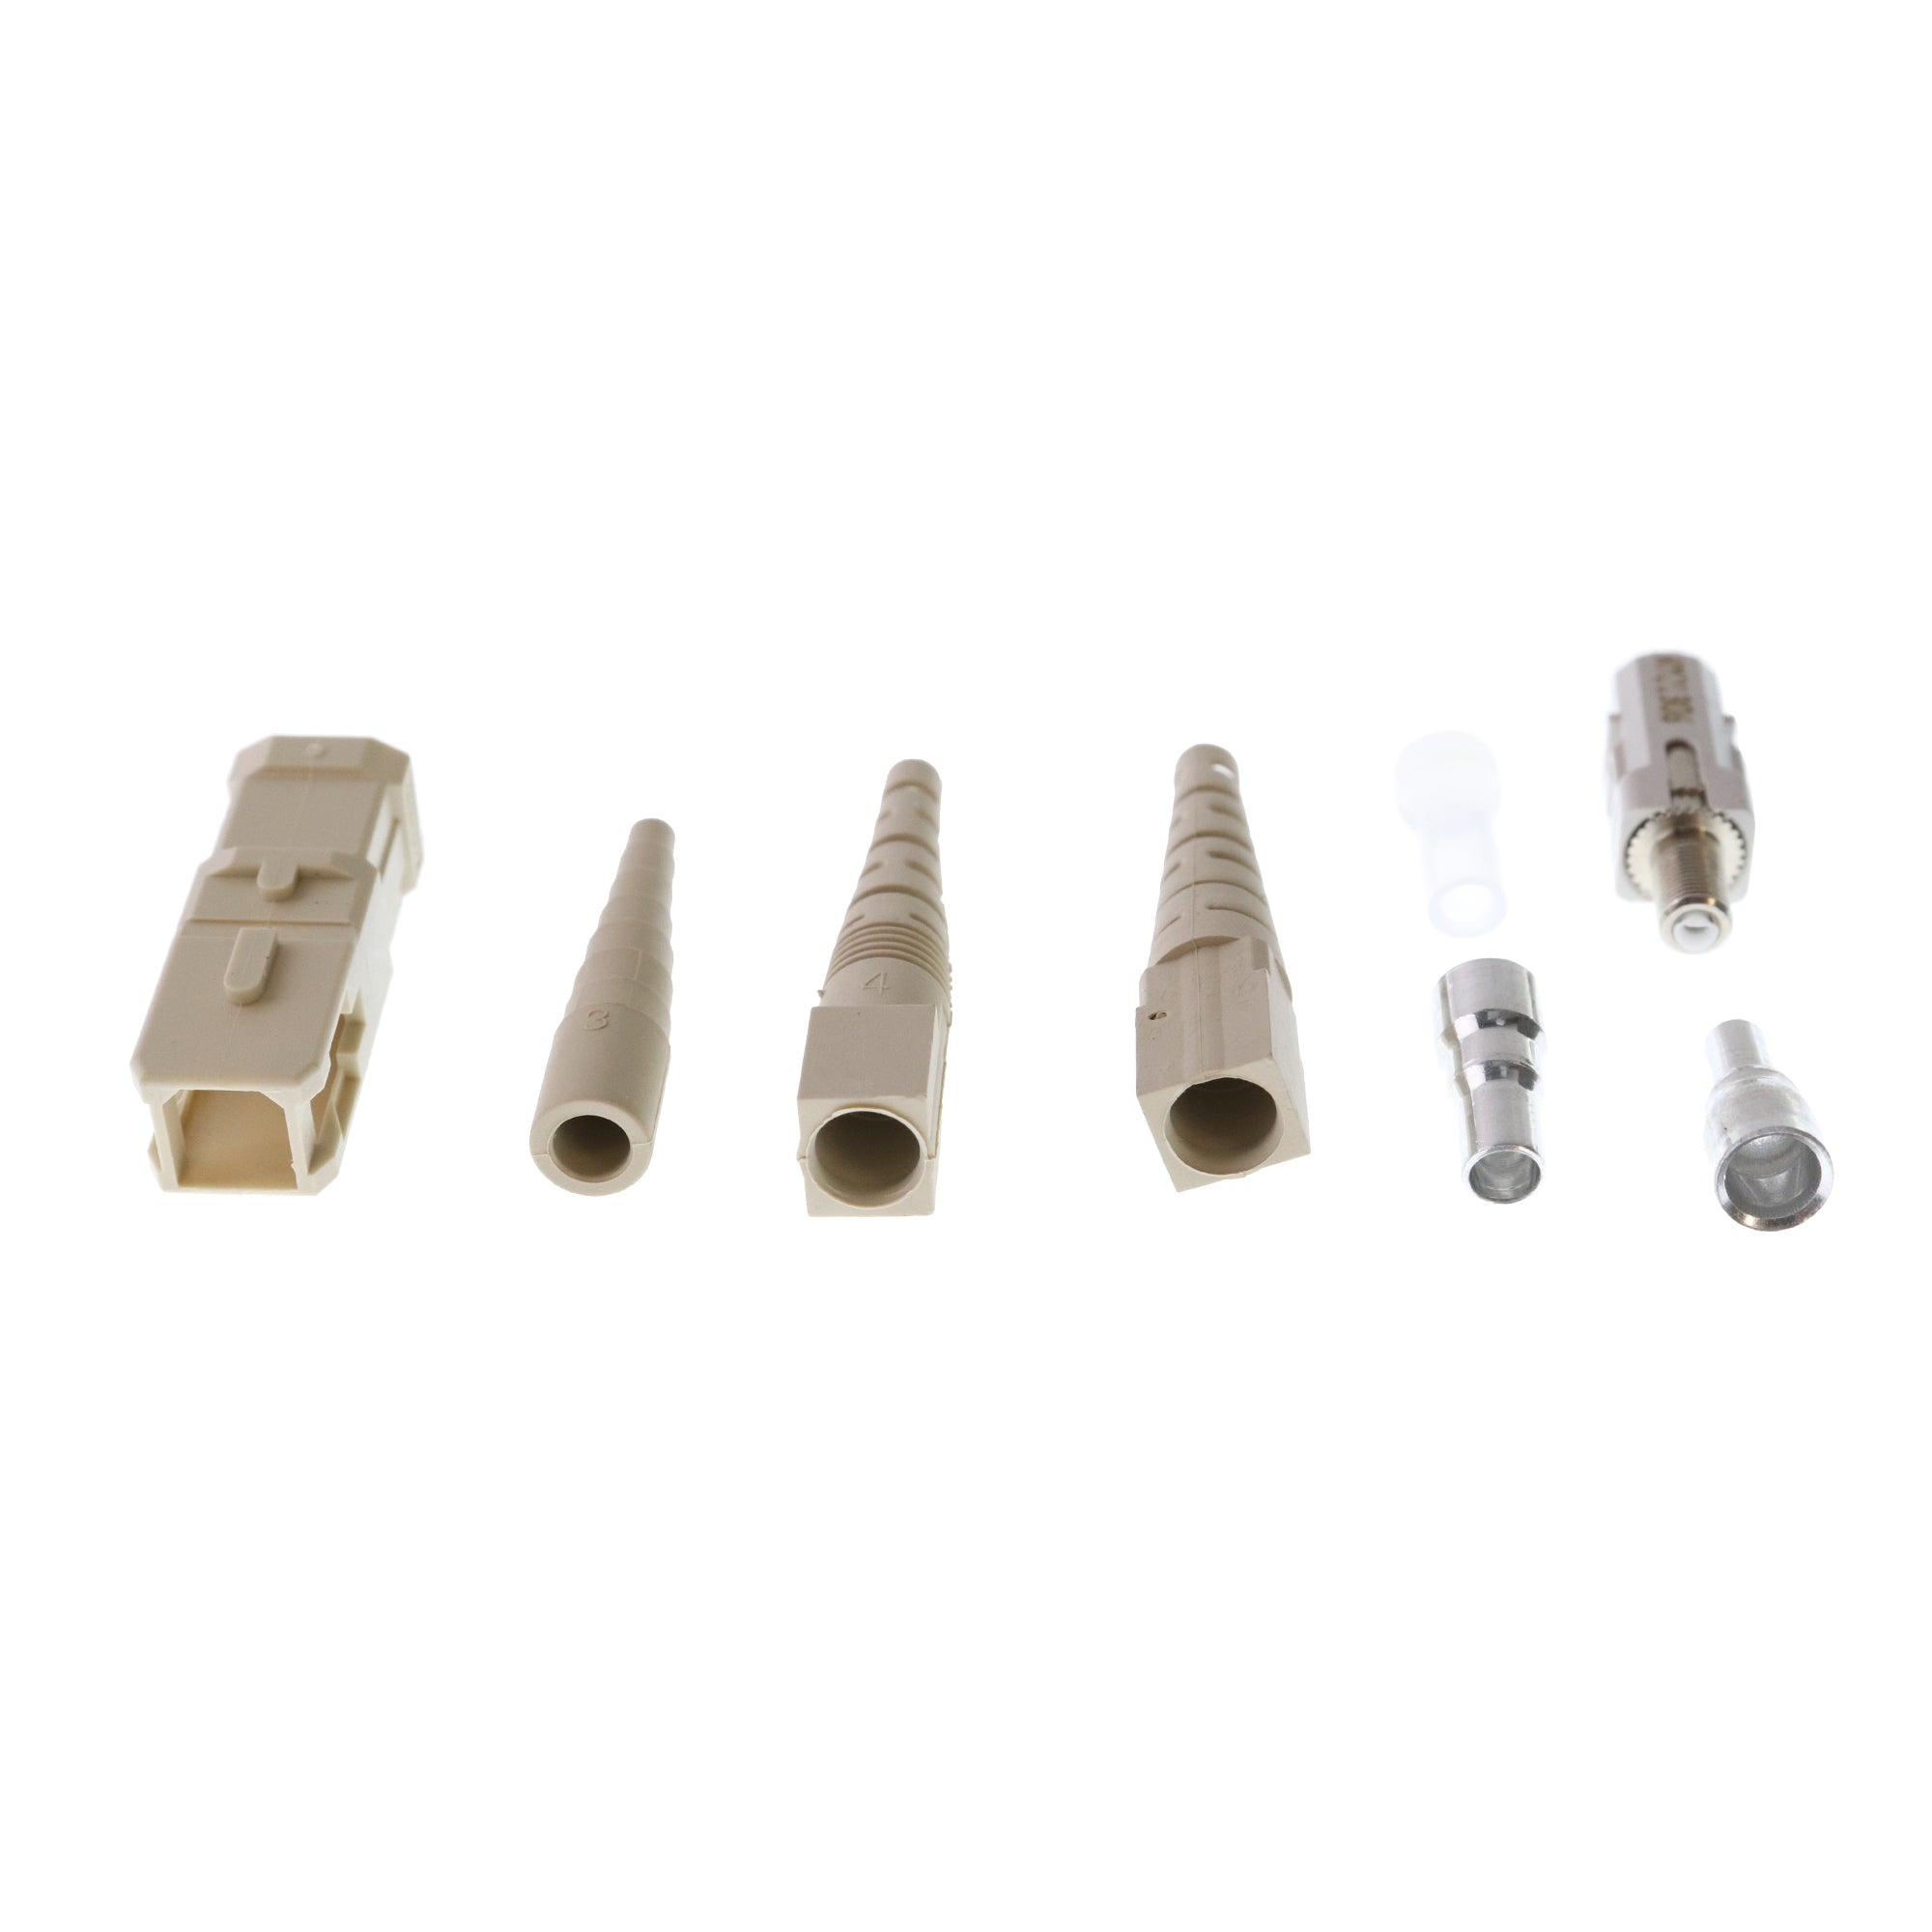 Corning Cable, CORNING CABLE 95-404-41-SP ANEROBIC-CURE MULTI-MODE SC FIBER OPTIC CONNECTOR